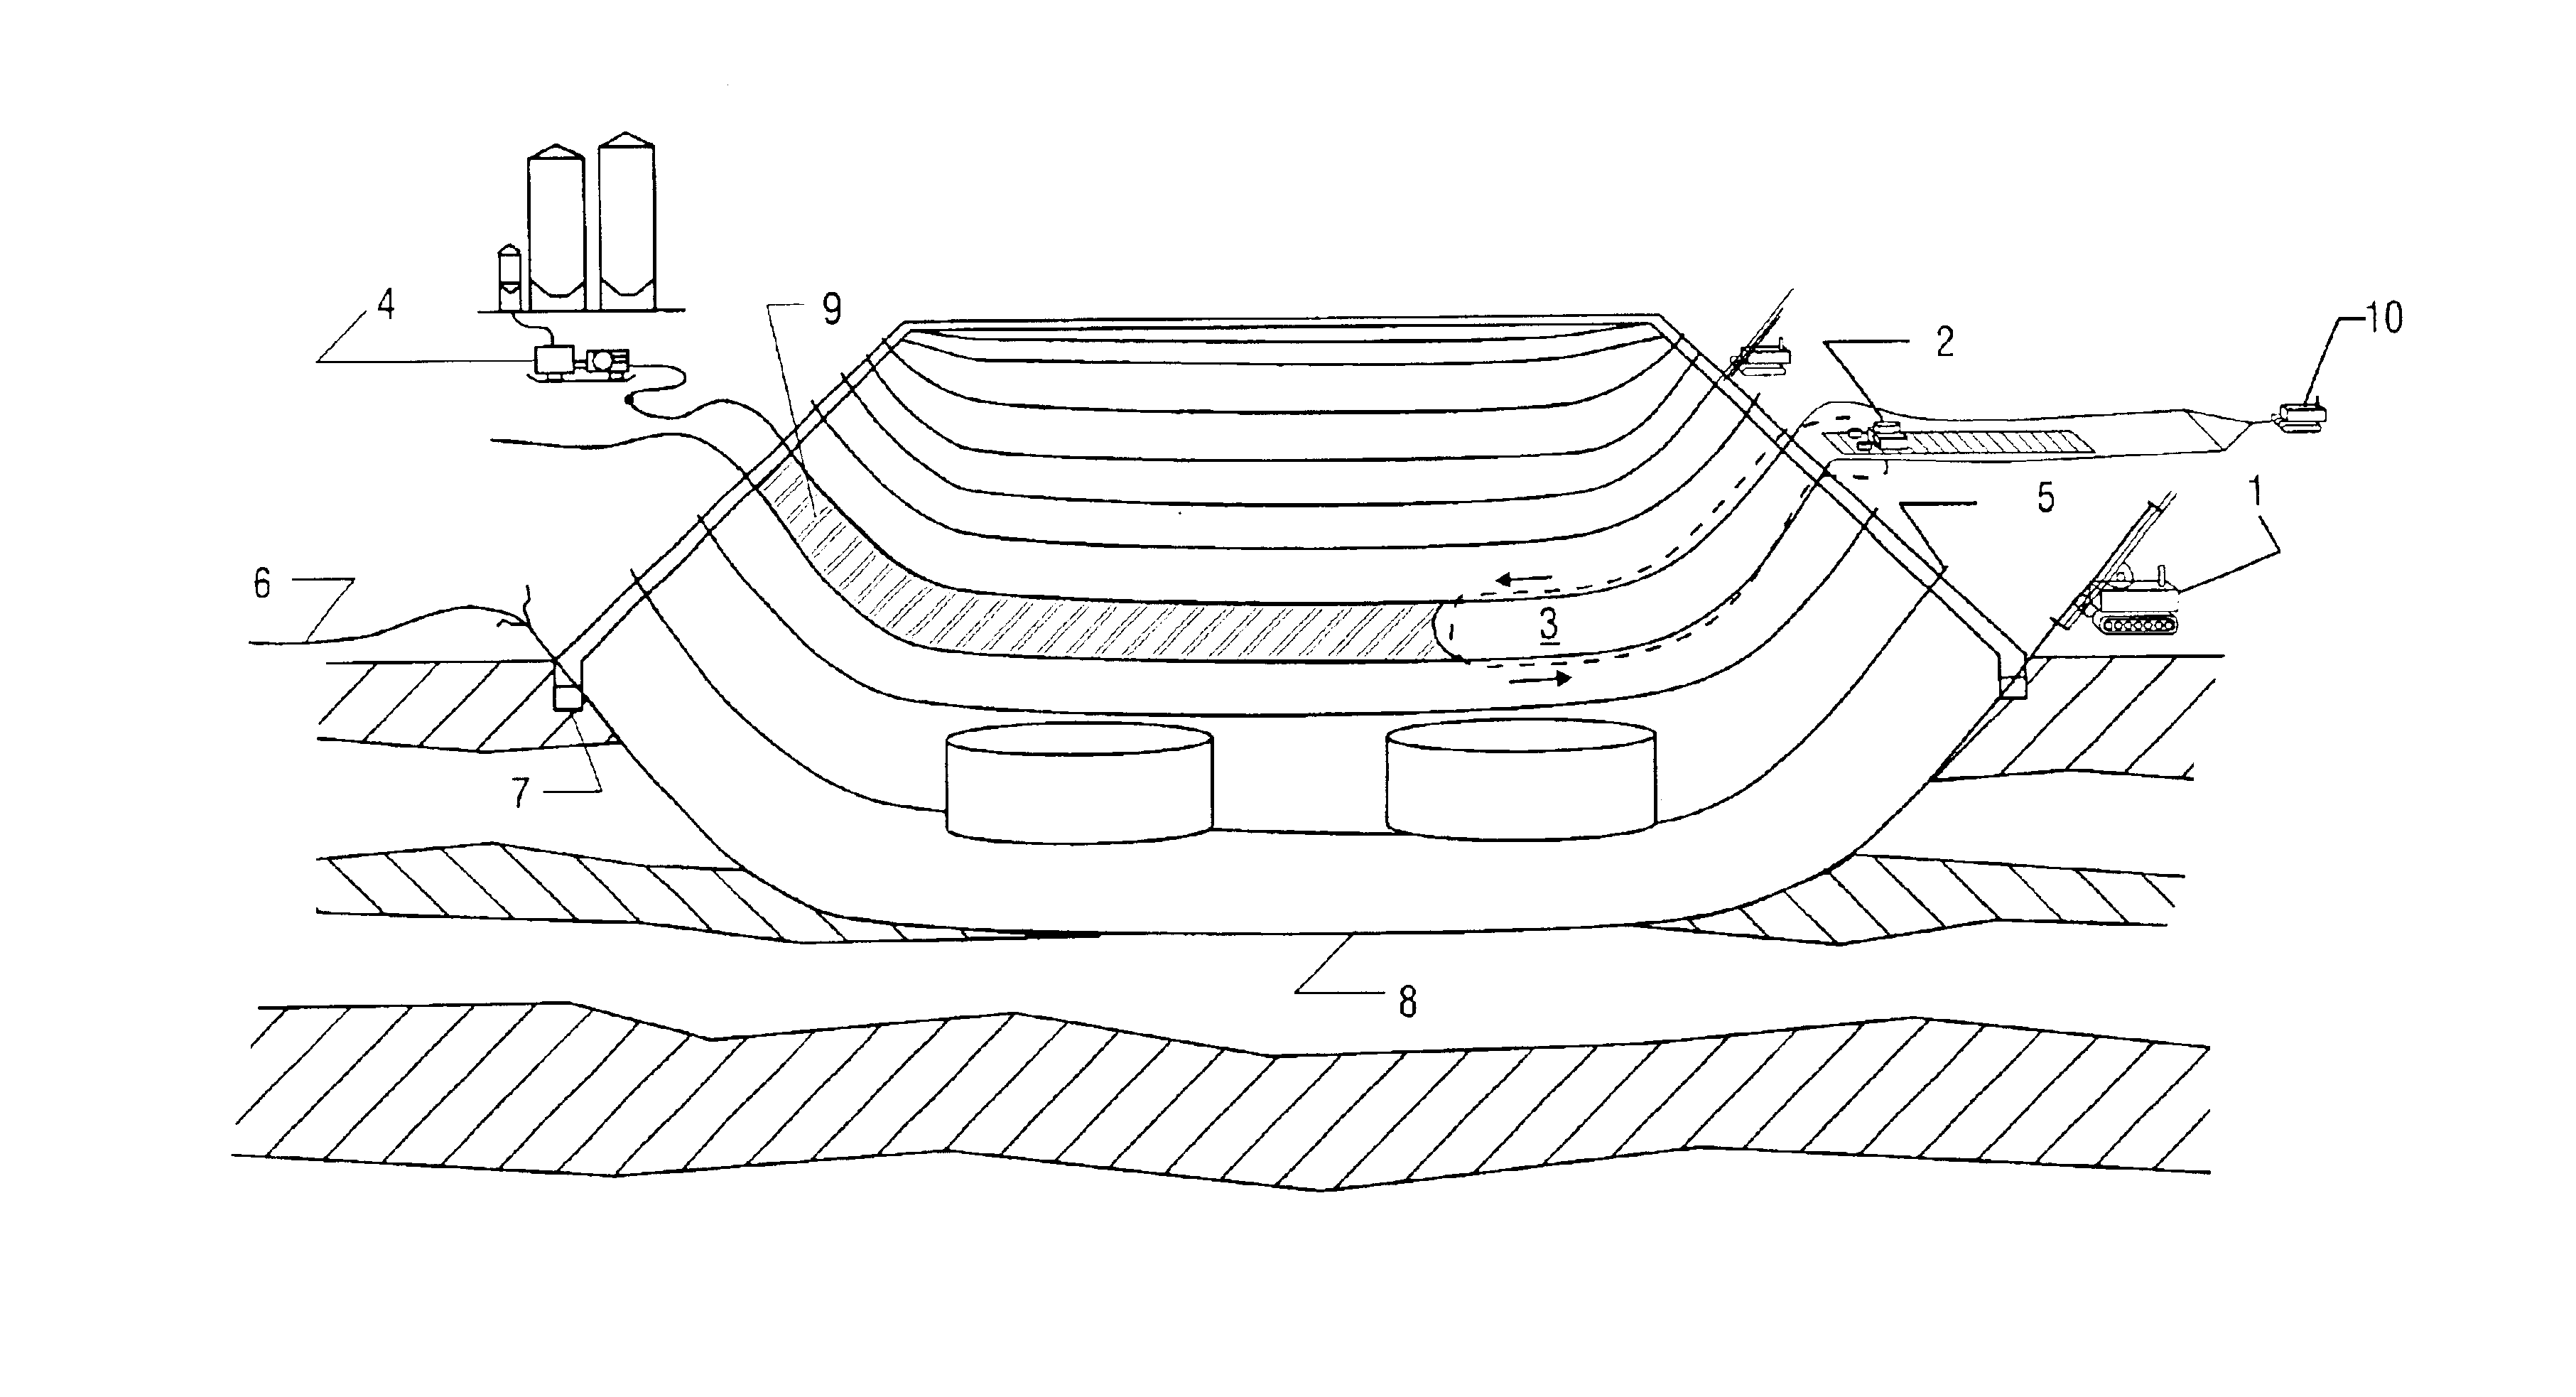 Grout compositions for construction of subterranean barriers